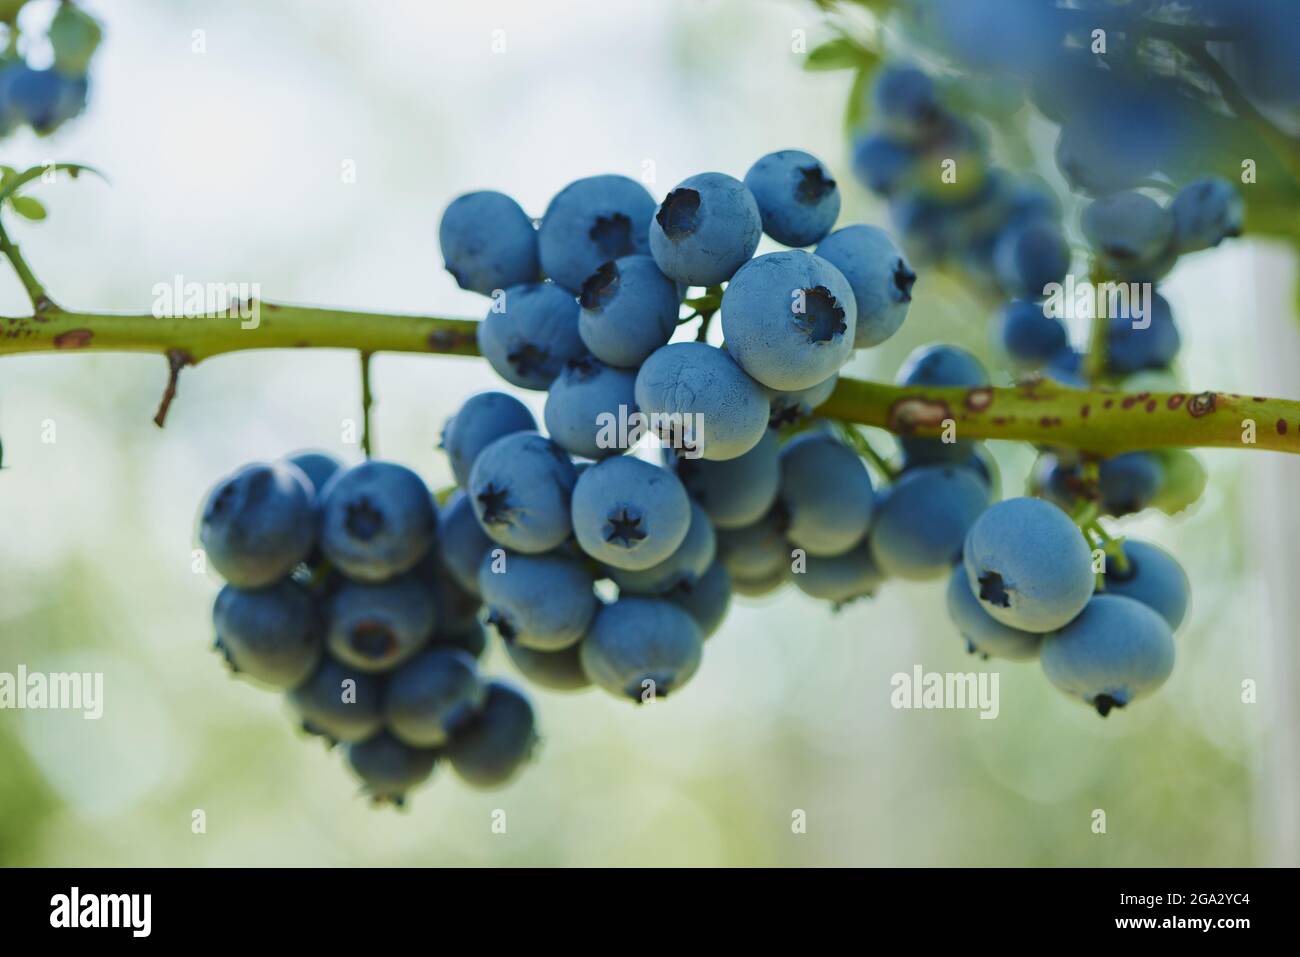 Close-up of ripe northern highbush blueberry or huckleberry (Vaccinium corymbosum) hanging on the branch in summer; Upper Palatinate, Bavaria, Germany Stock Photo